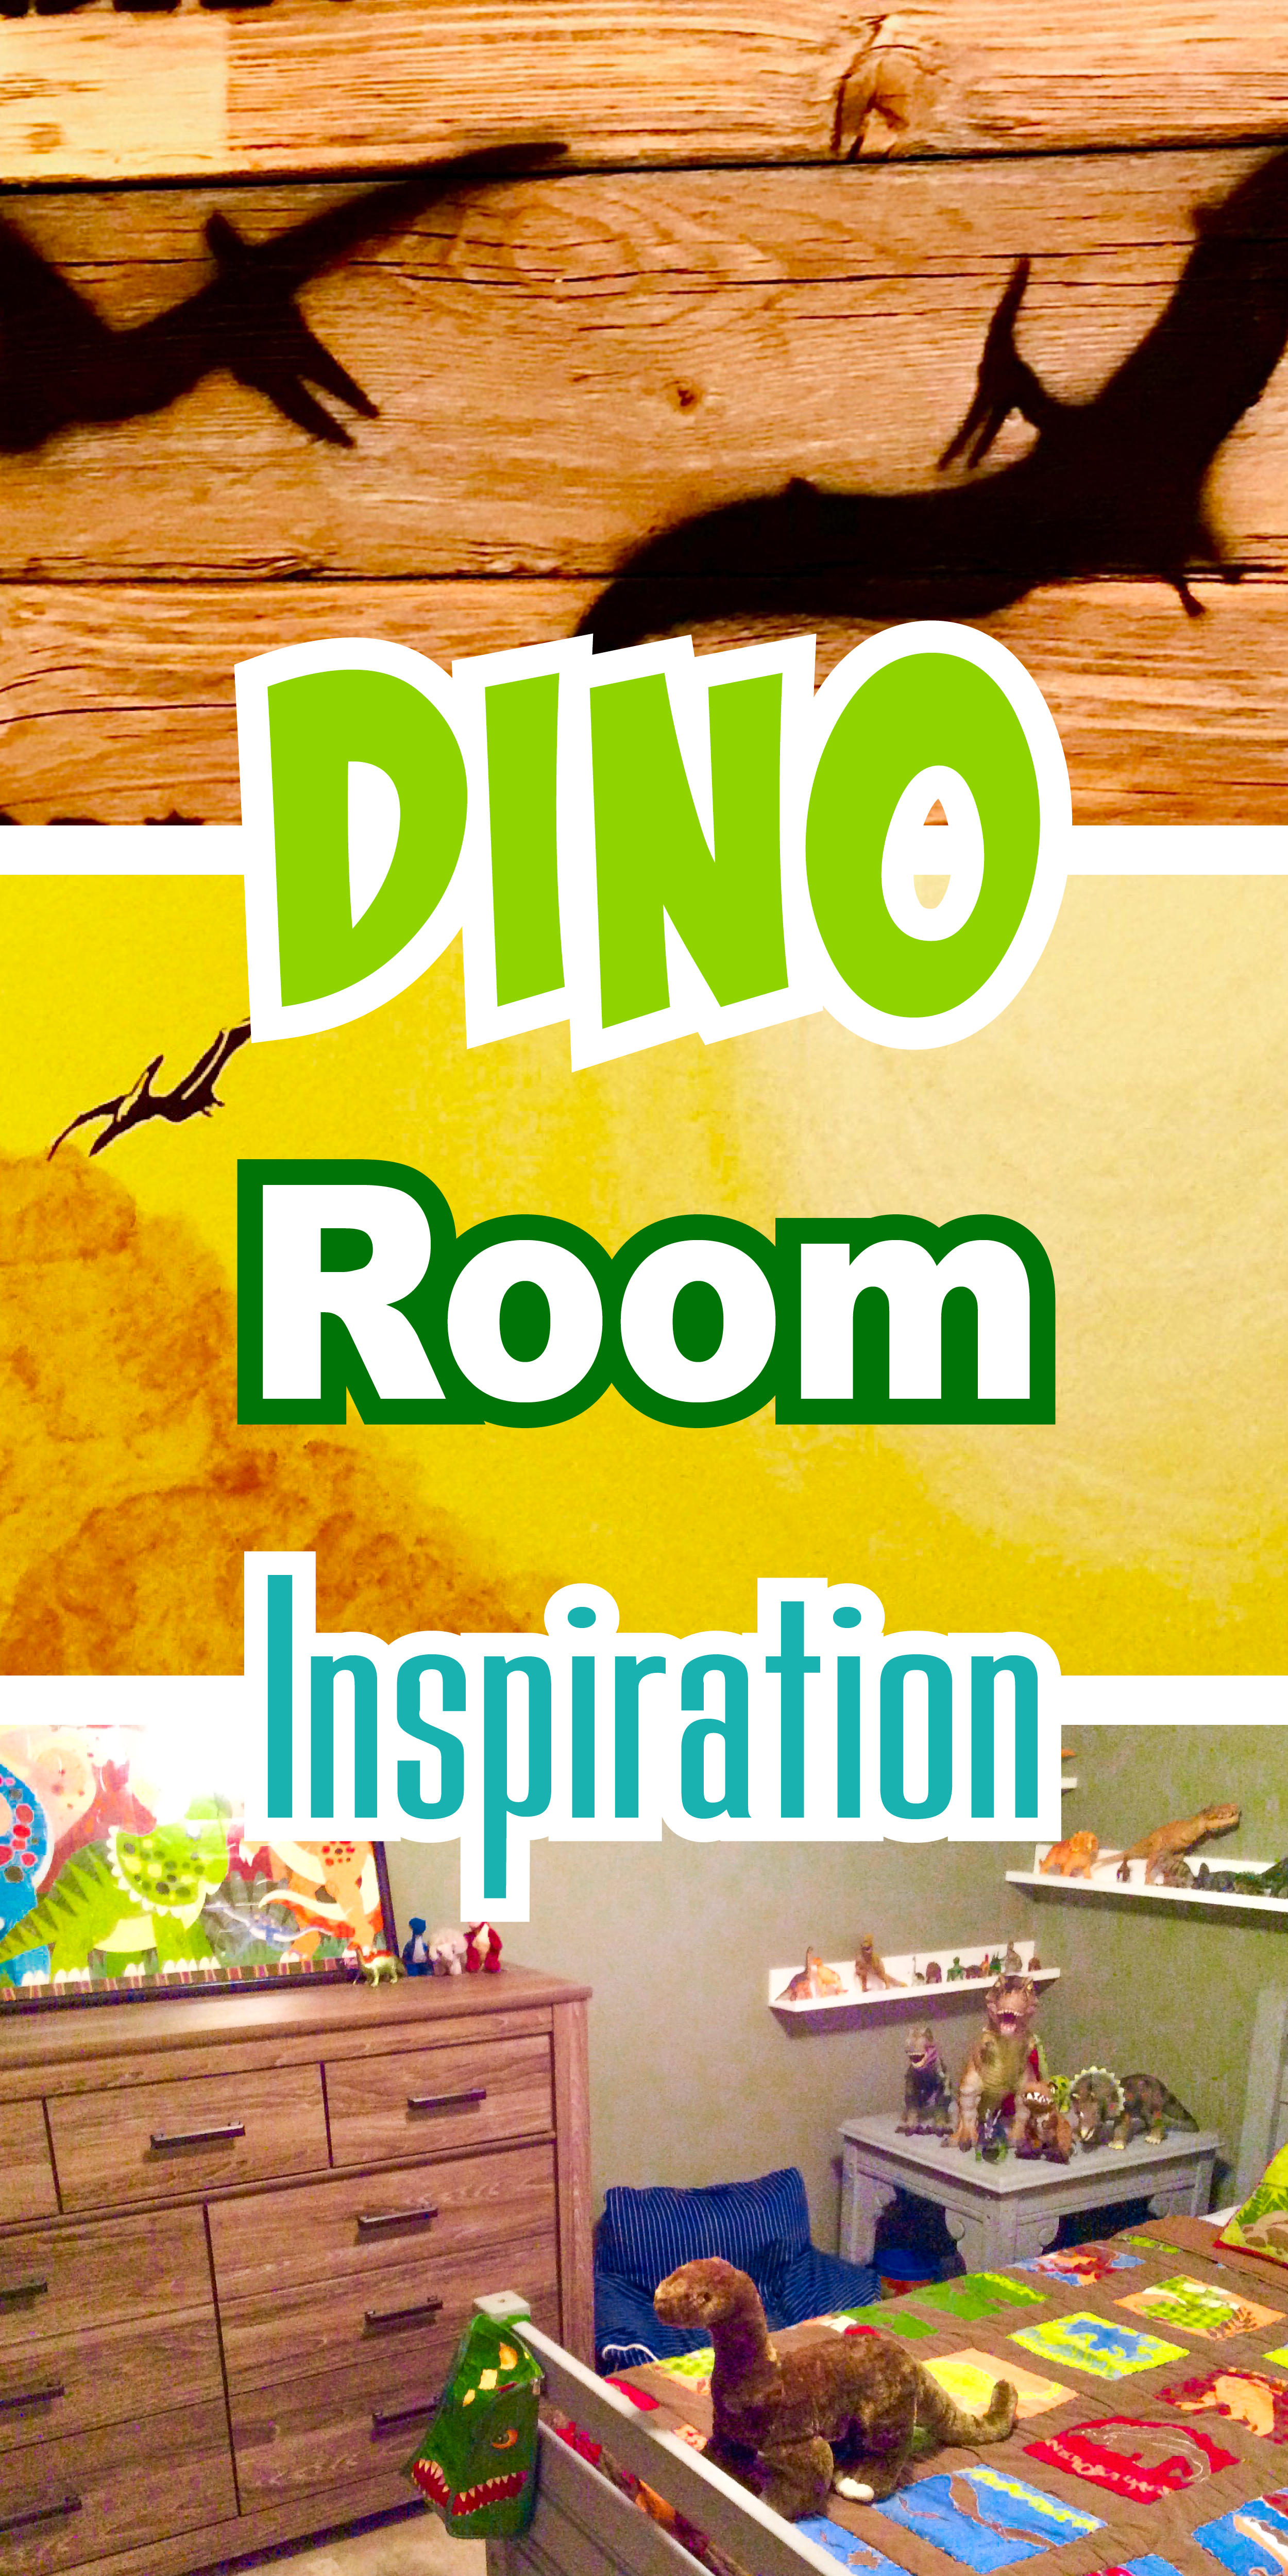 A collage of dinosaur decor with a text overlay